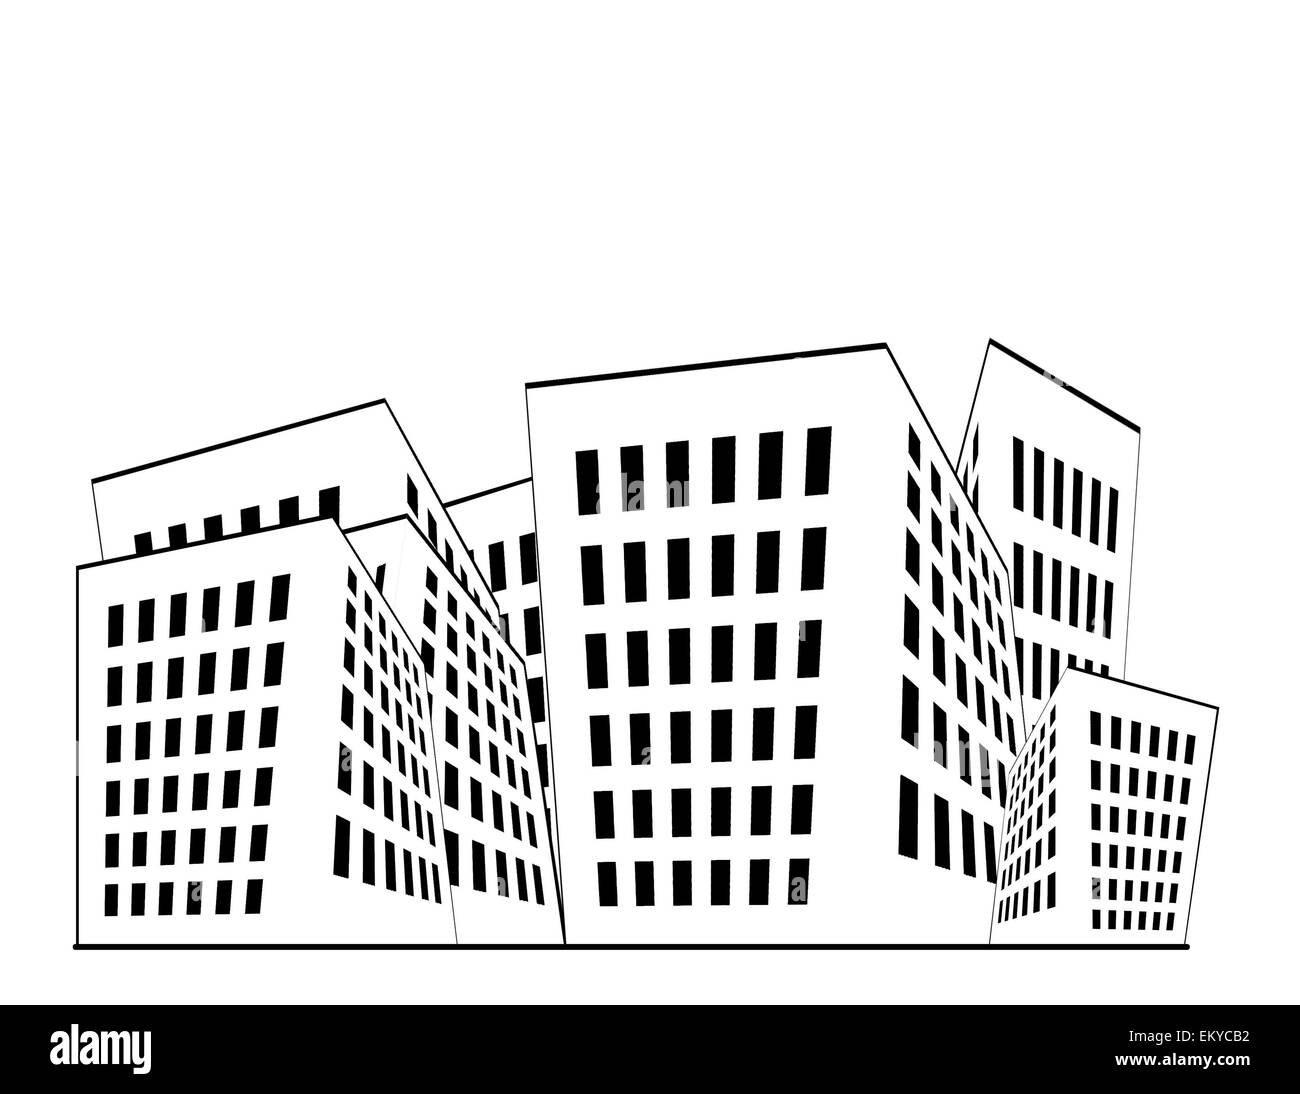 Building illustration in black and white with white space above. Stock Photo